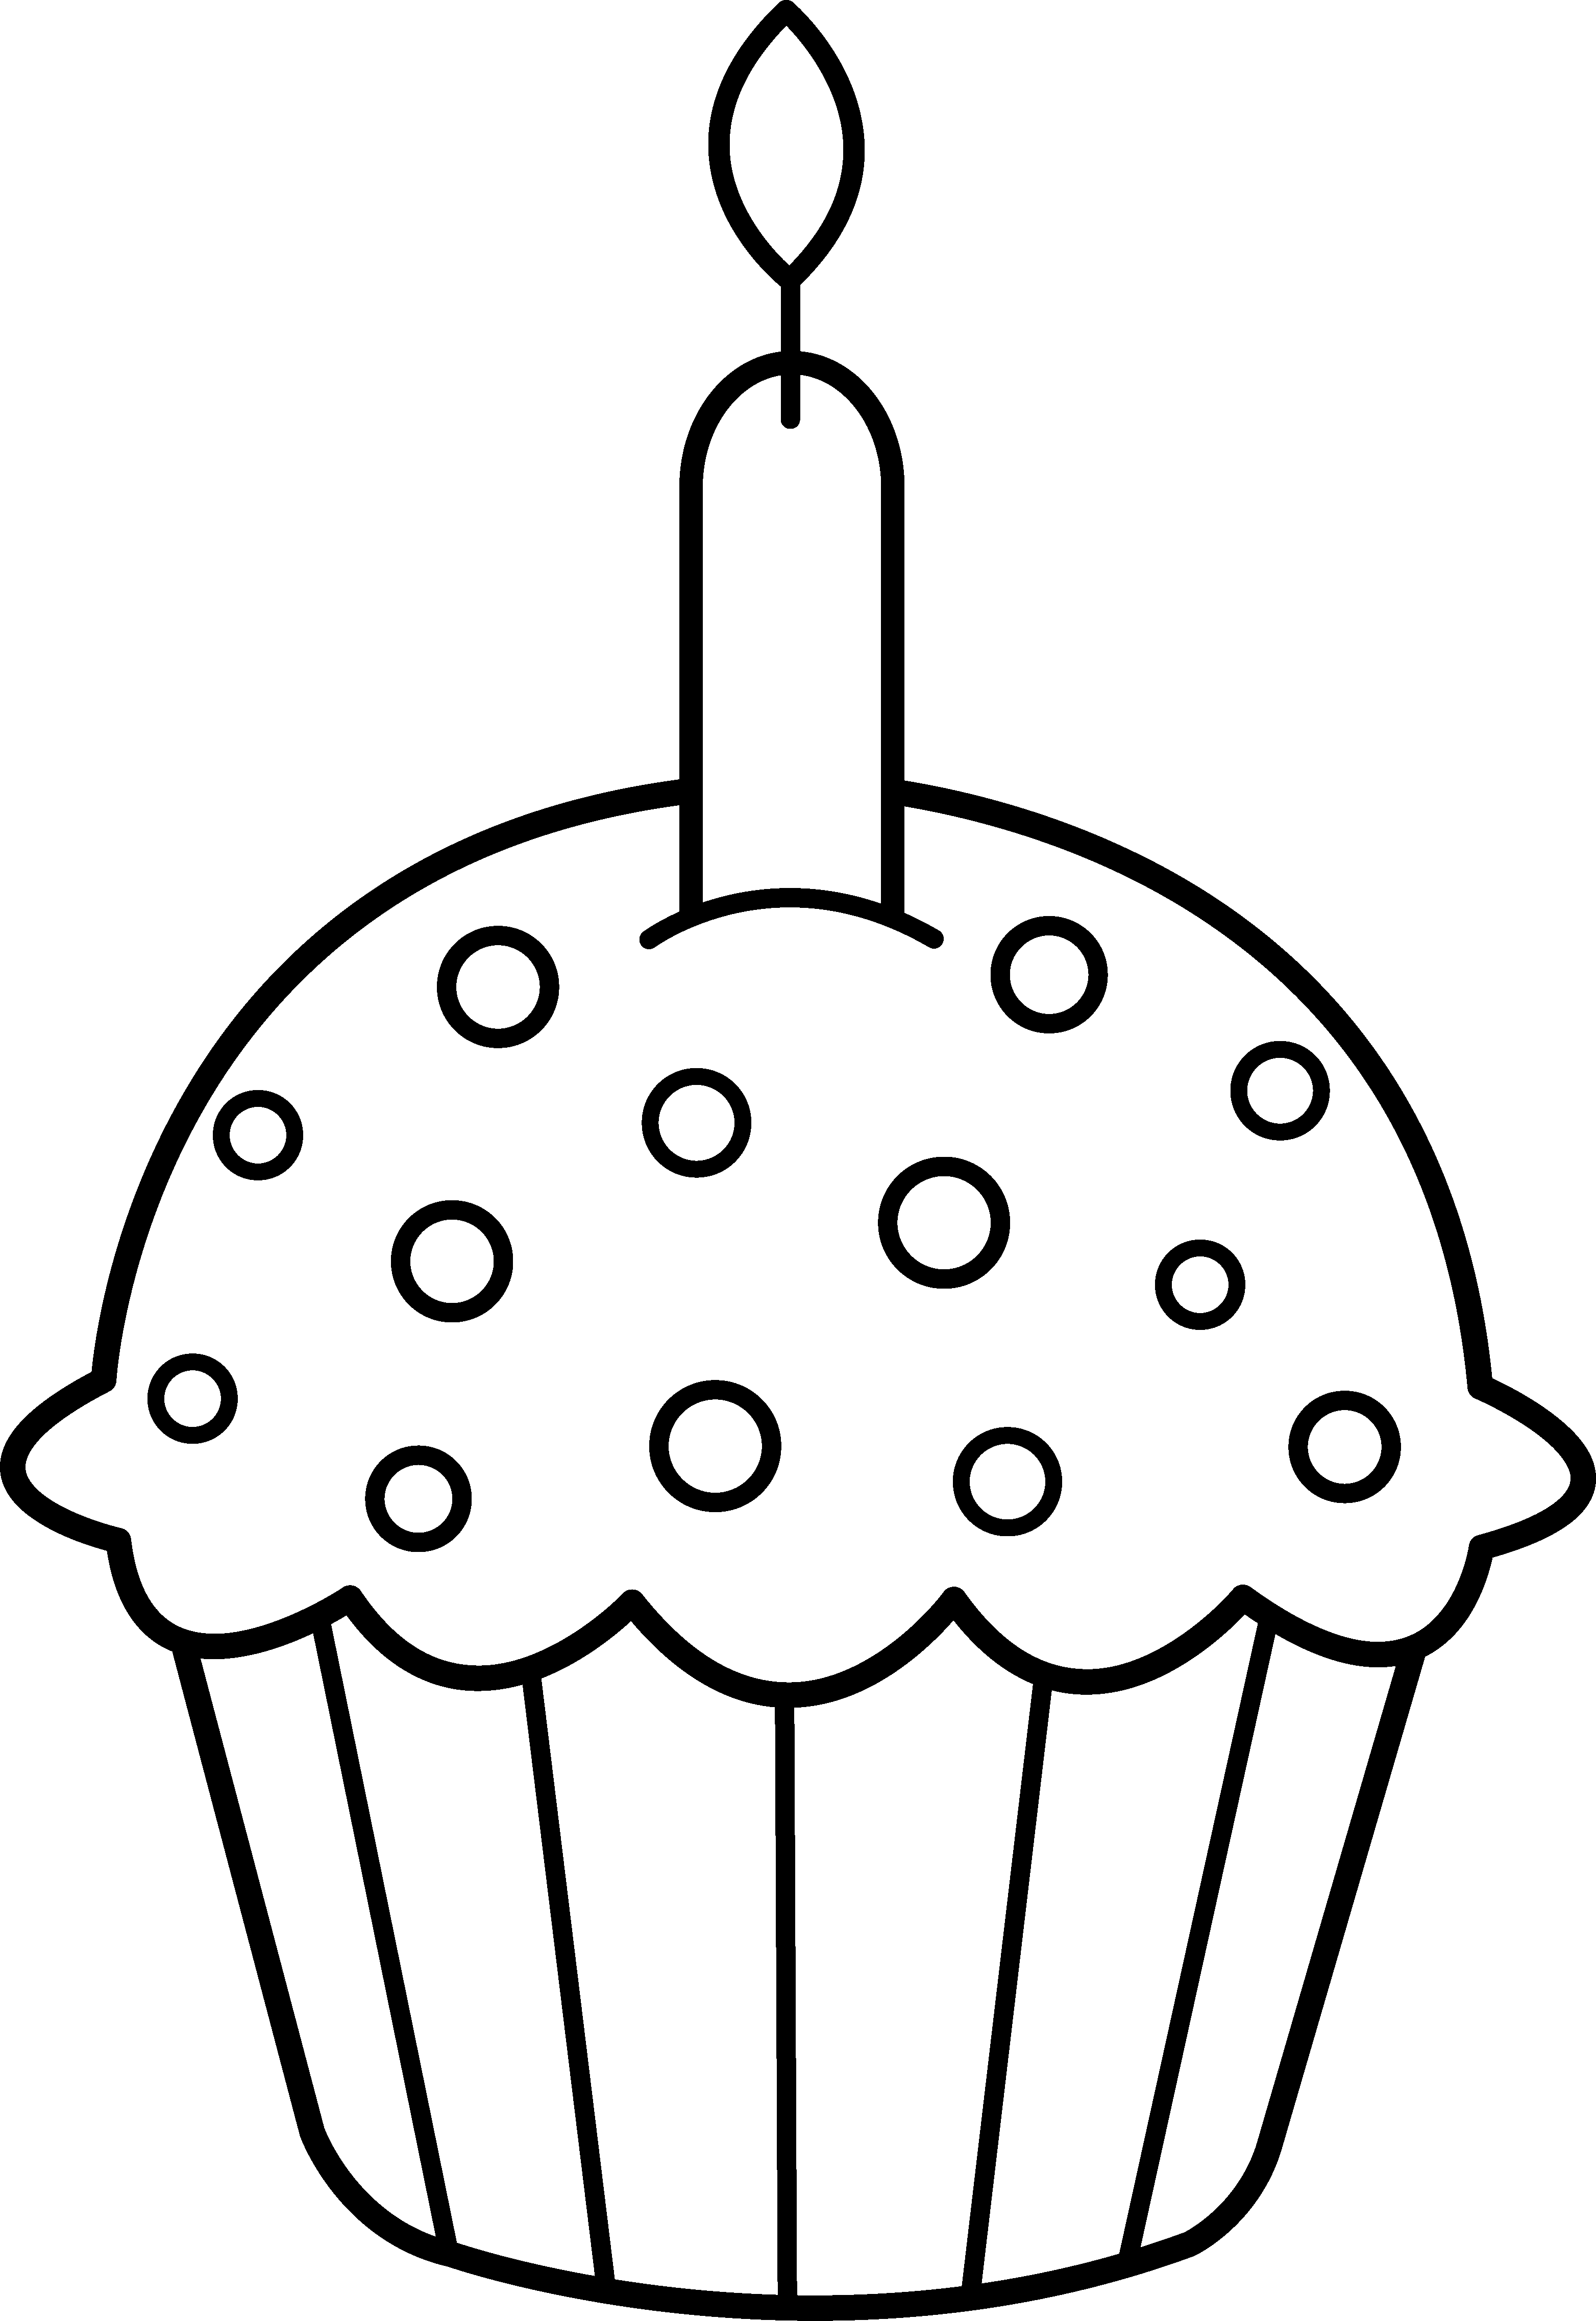 Free clip art gift. Fraction clipart cupcake